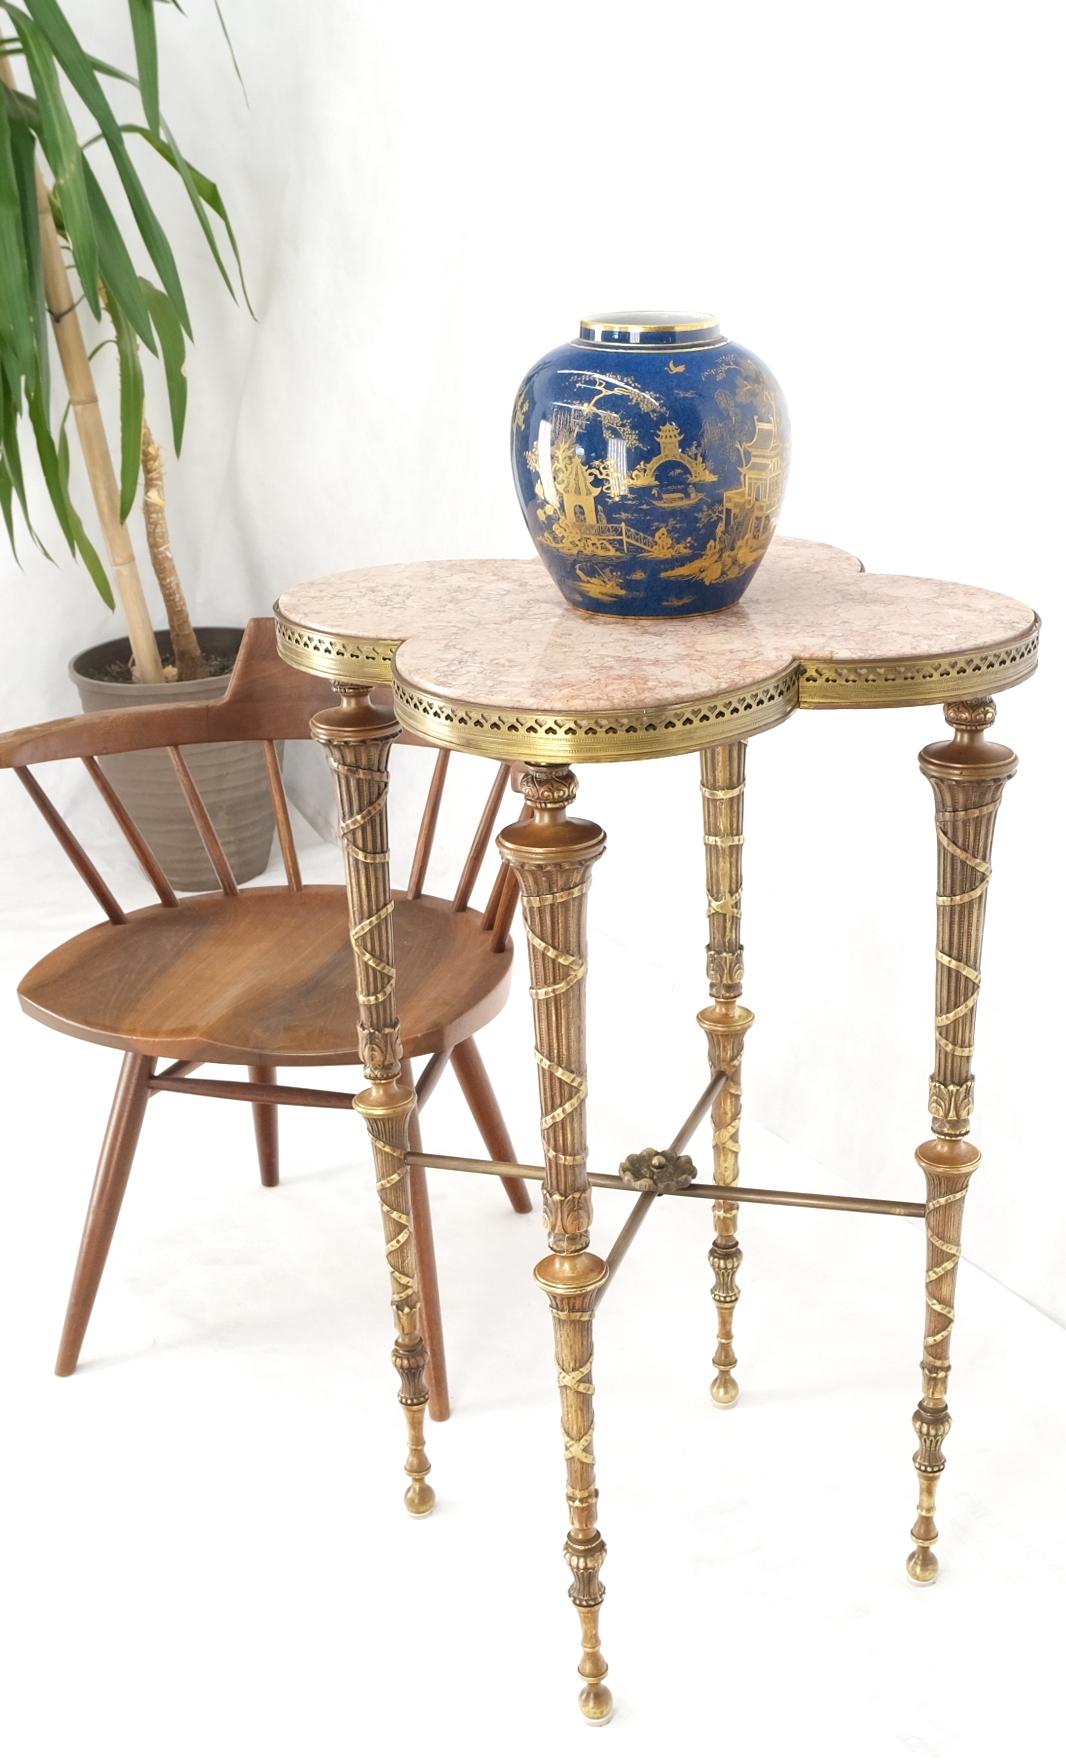 Exception clover shape pink marble top fluted brass legs tall pedestal stand.